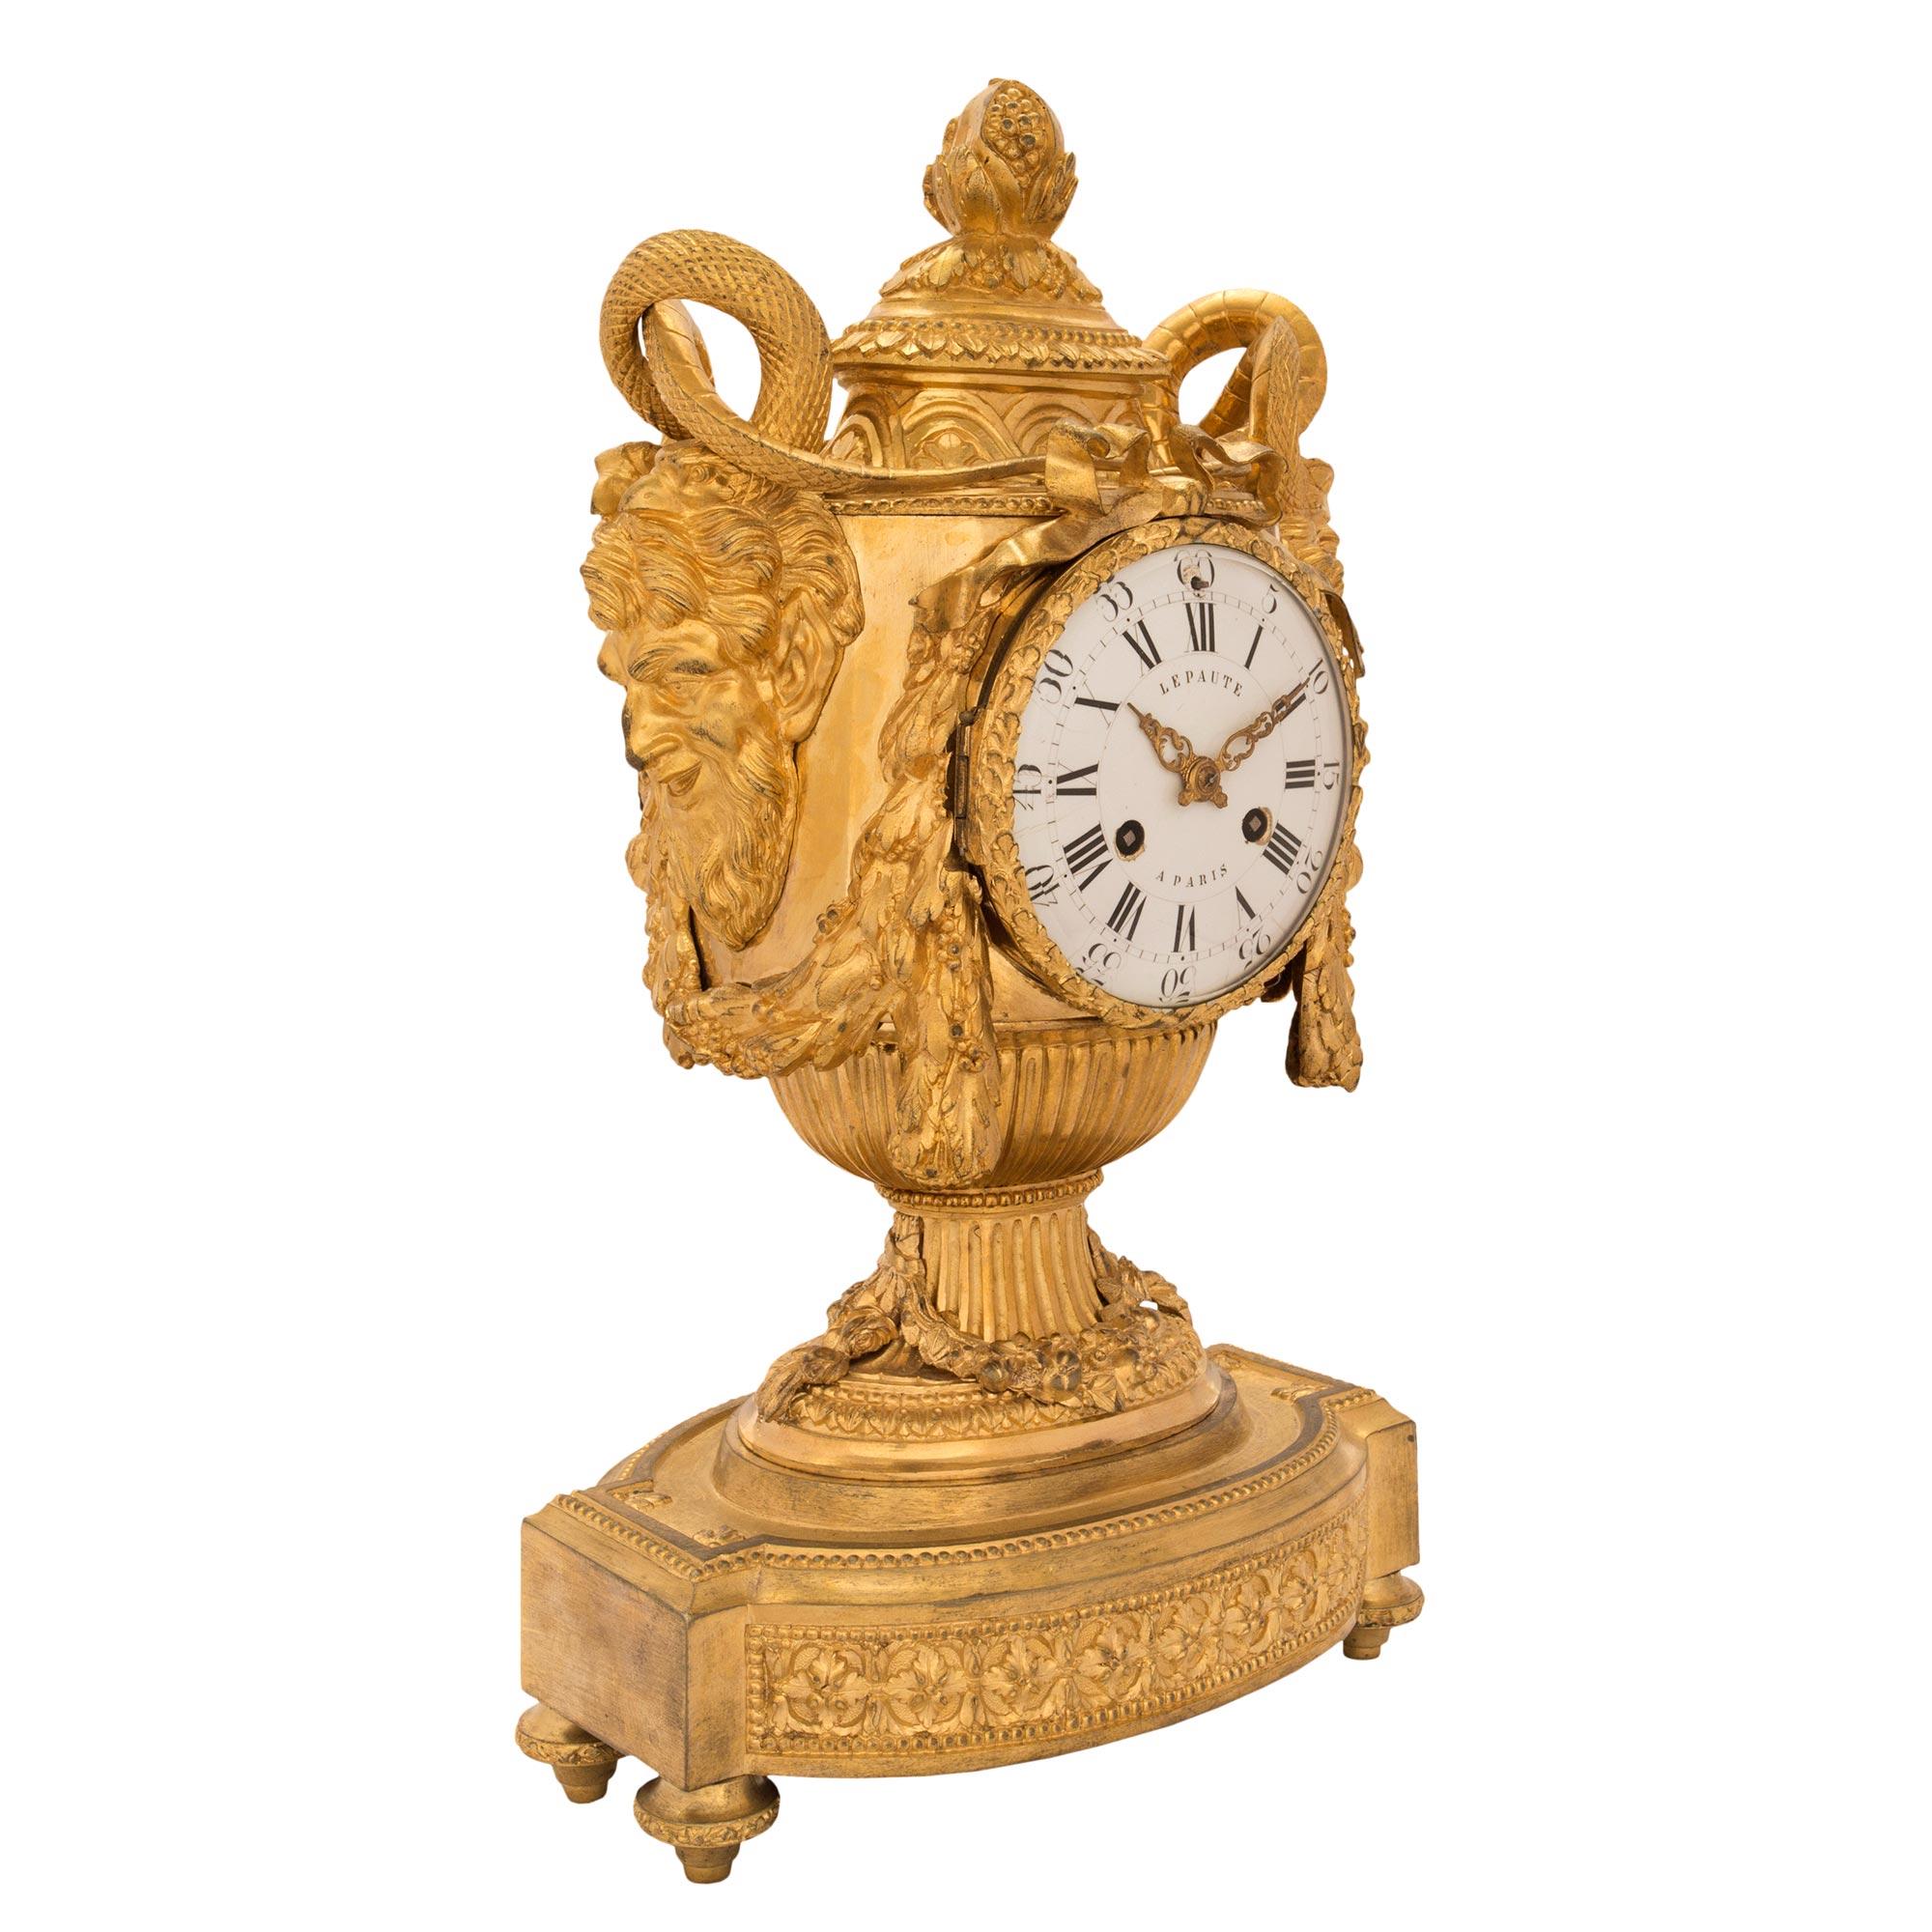 French Early 19th Century Louis XVI Style Ormolu Clock, 'Signed Lepaute Paris' In Good Condition For Sale In West Palm Beach, FL